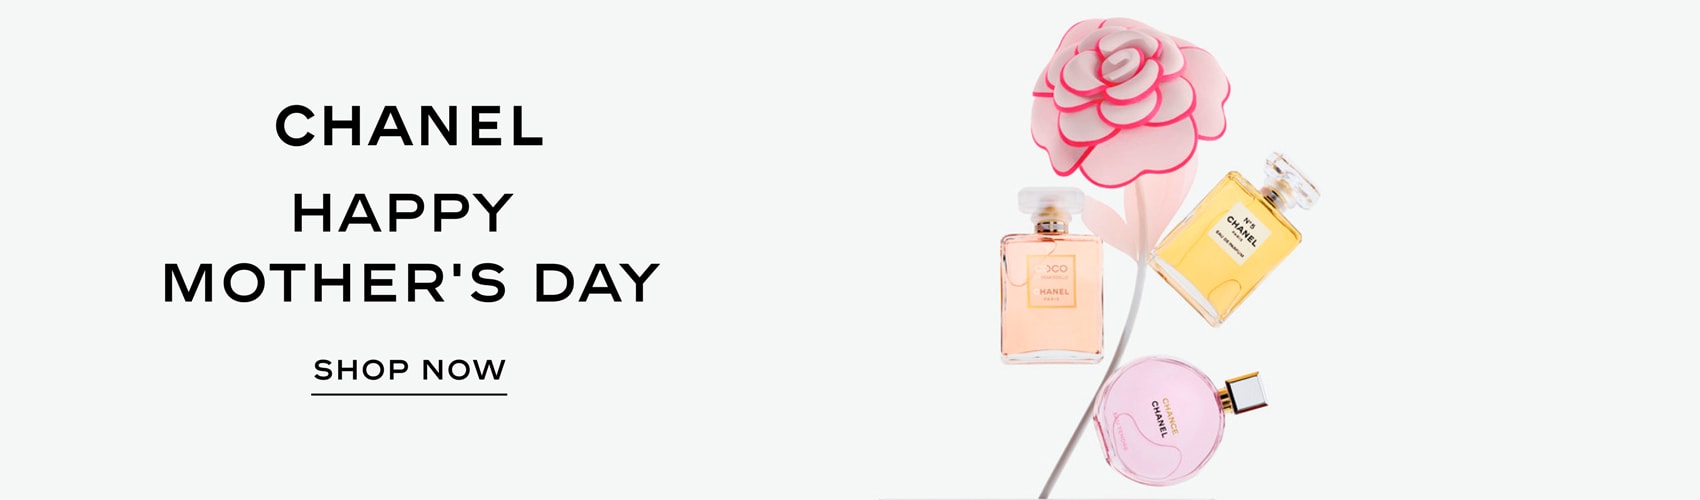 CHANEL | Mother's Day